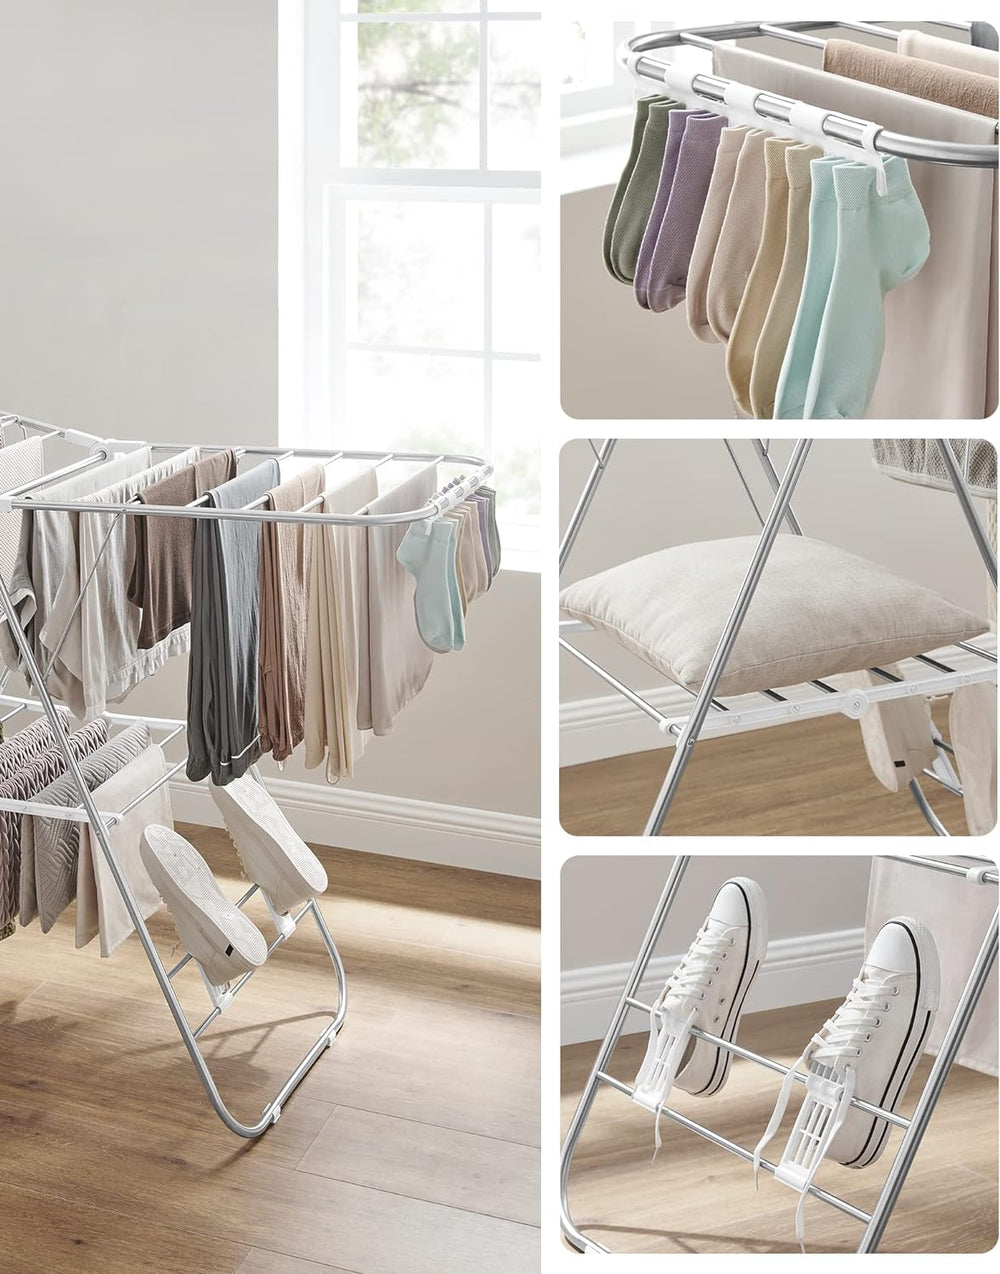 Songmics Foldable Clothes Drying Rack Clothes Airer with Height-Adjustable Wings